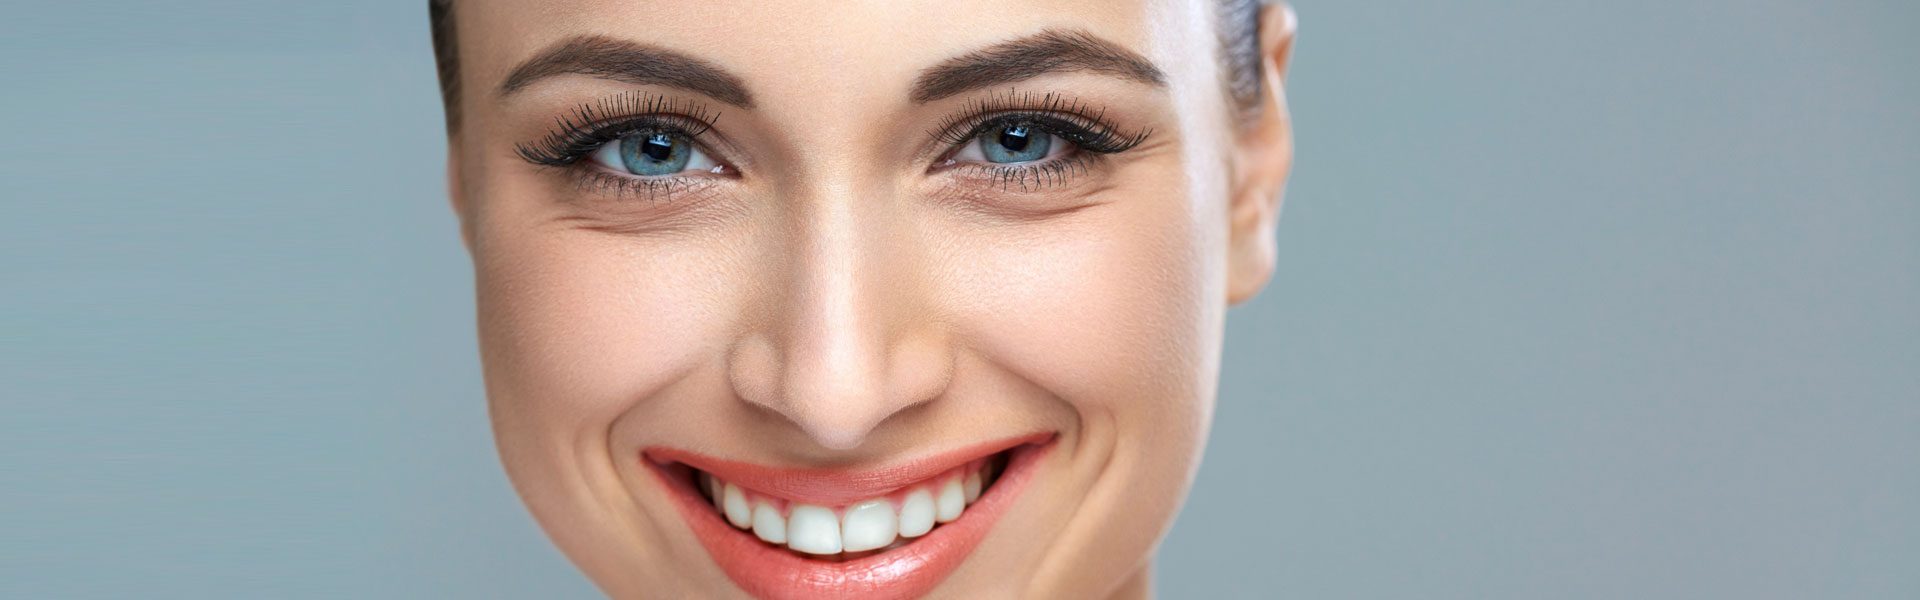 What You Need to Know About Dental Veneers